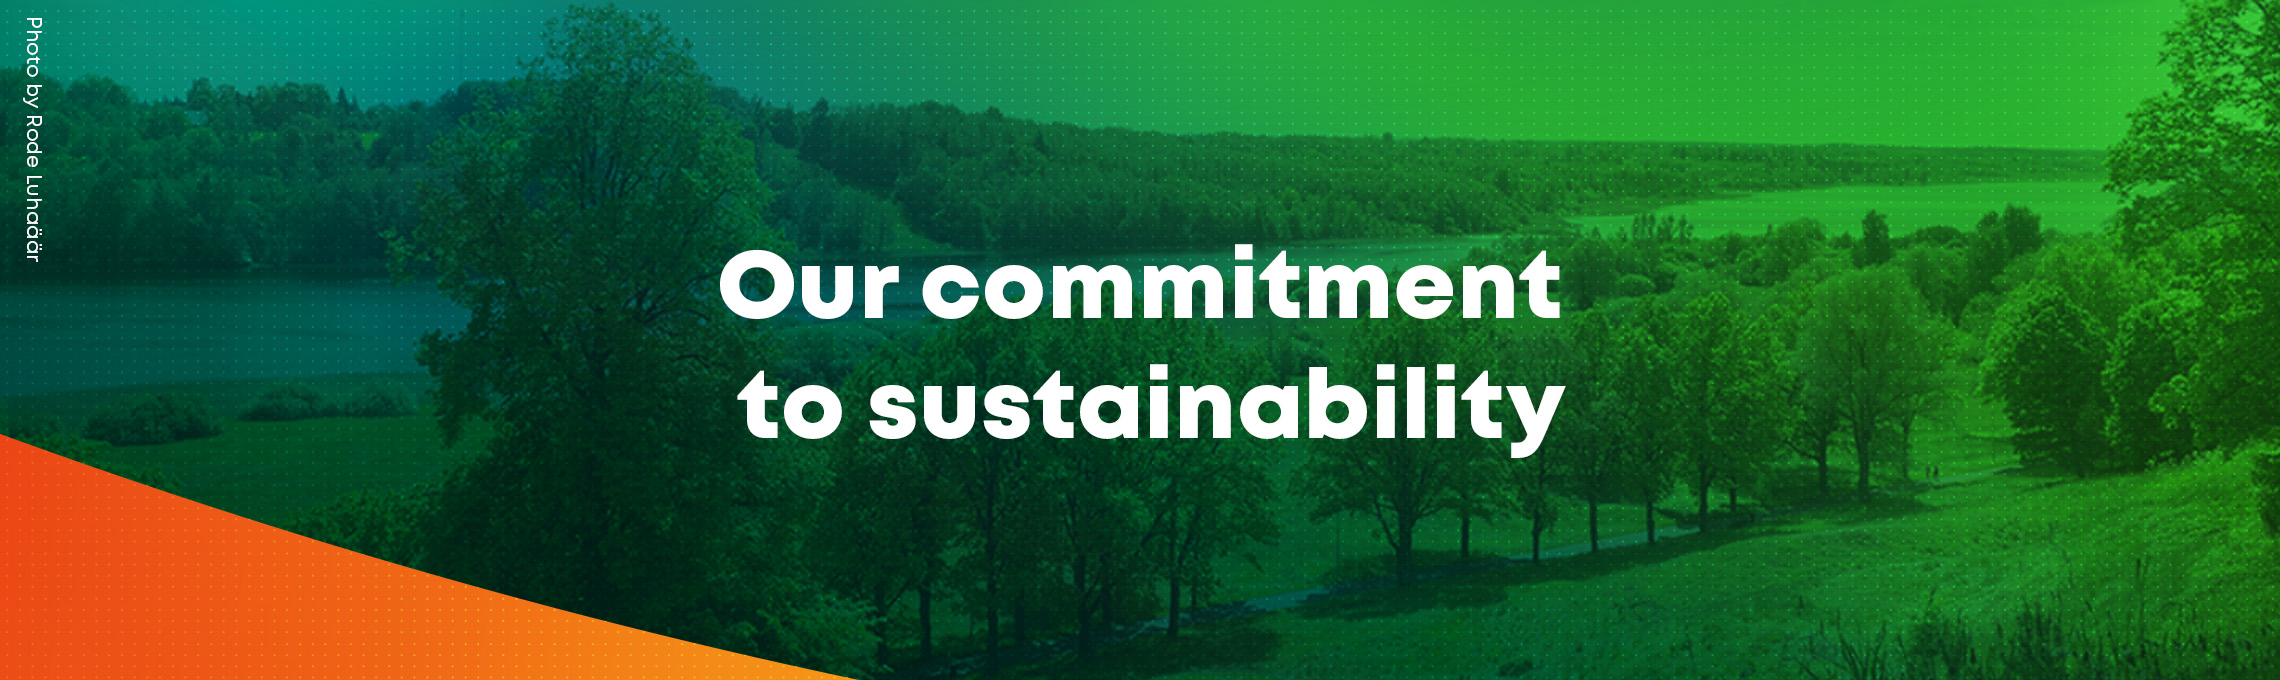 Section title: Our commitment to sustainability